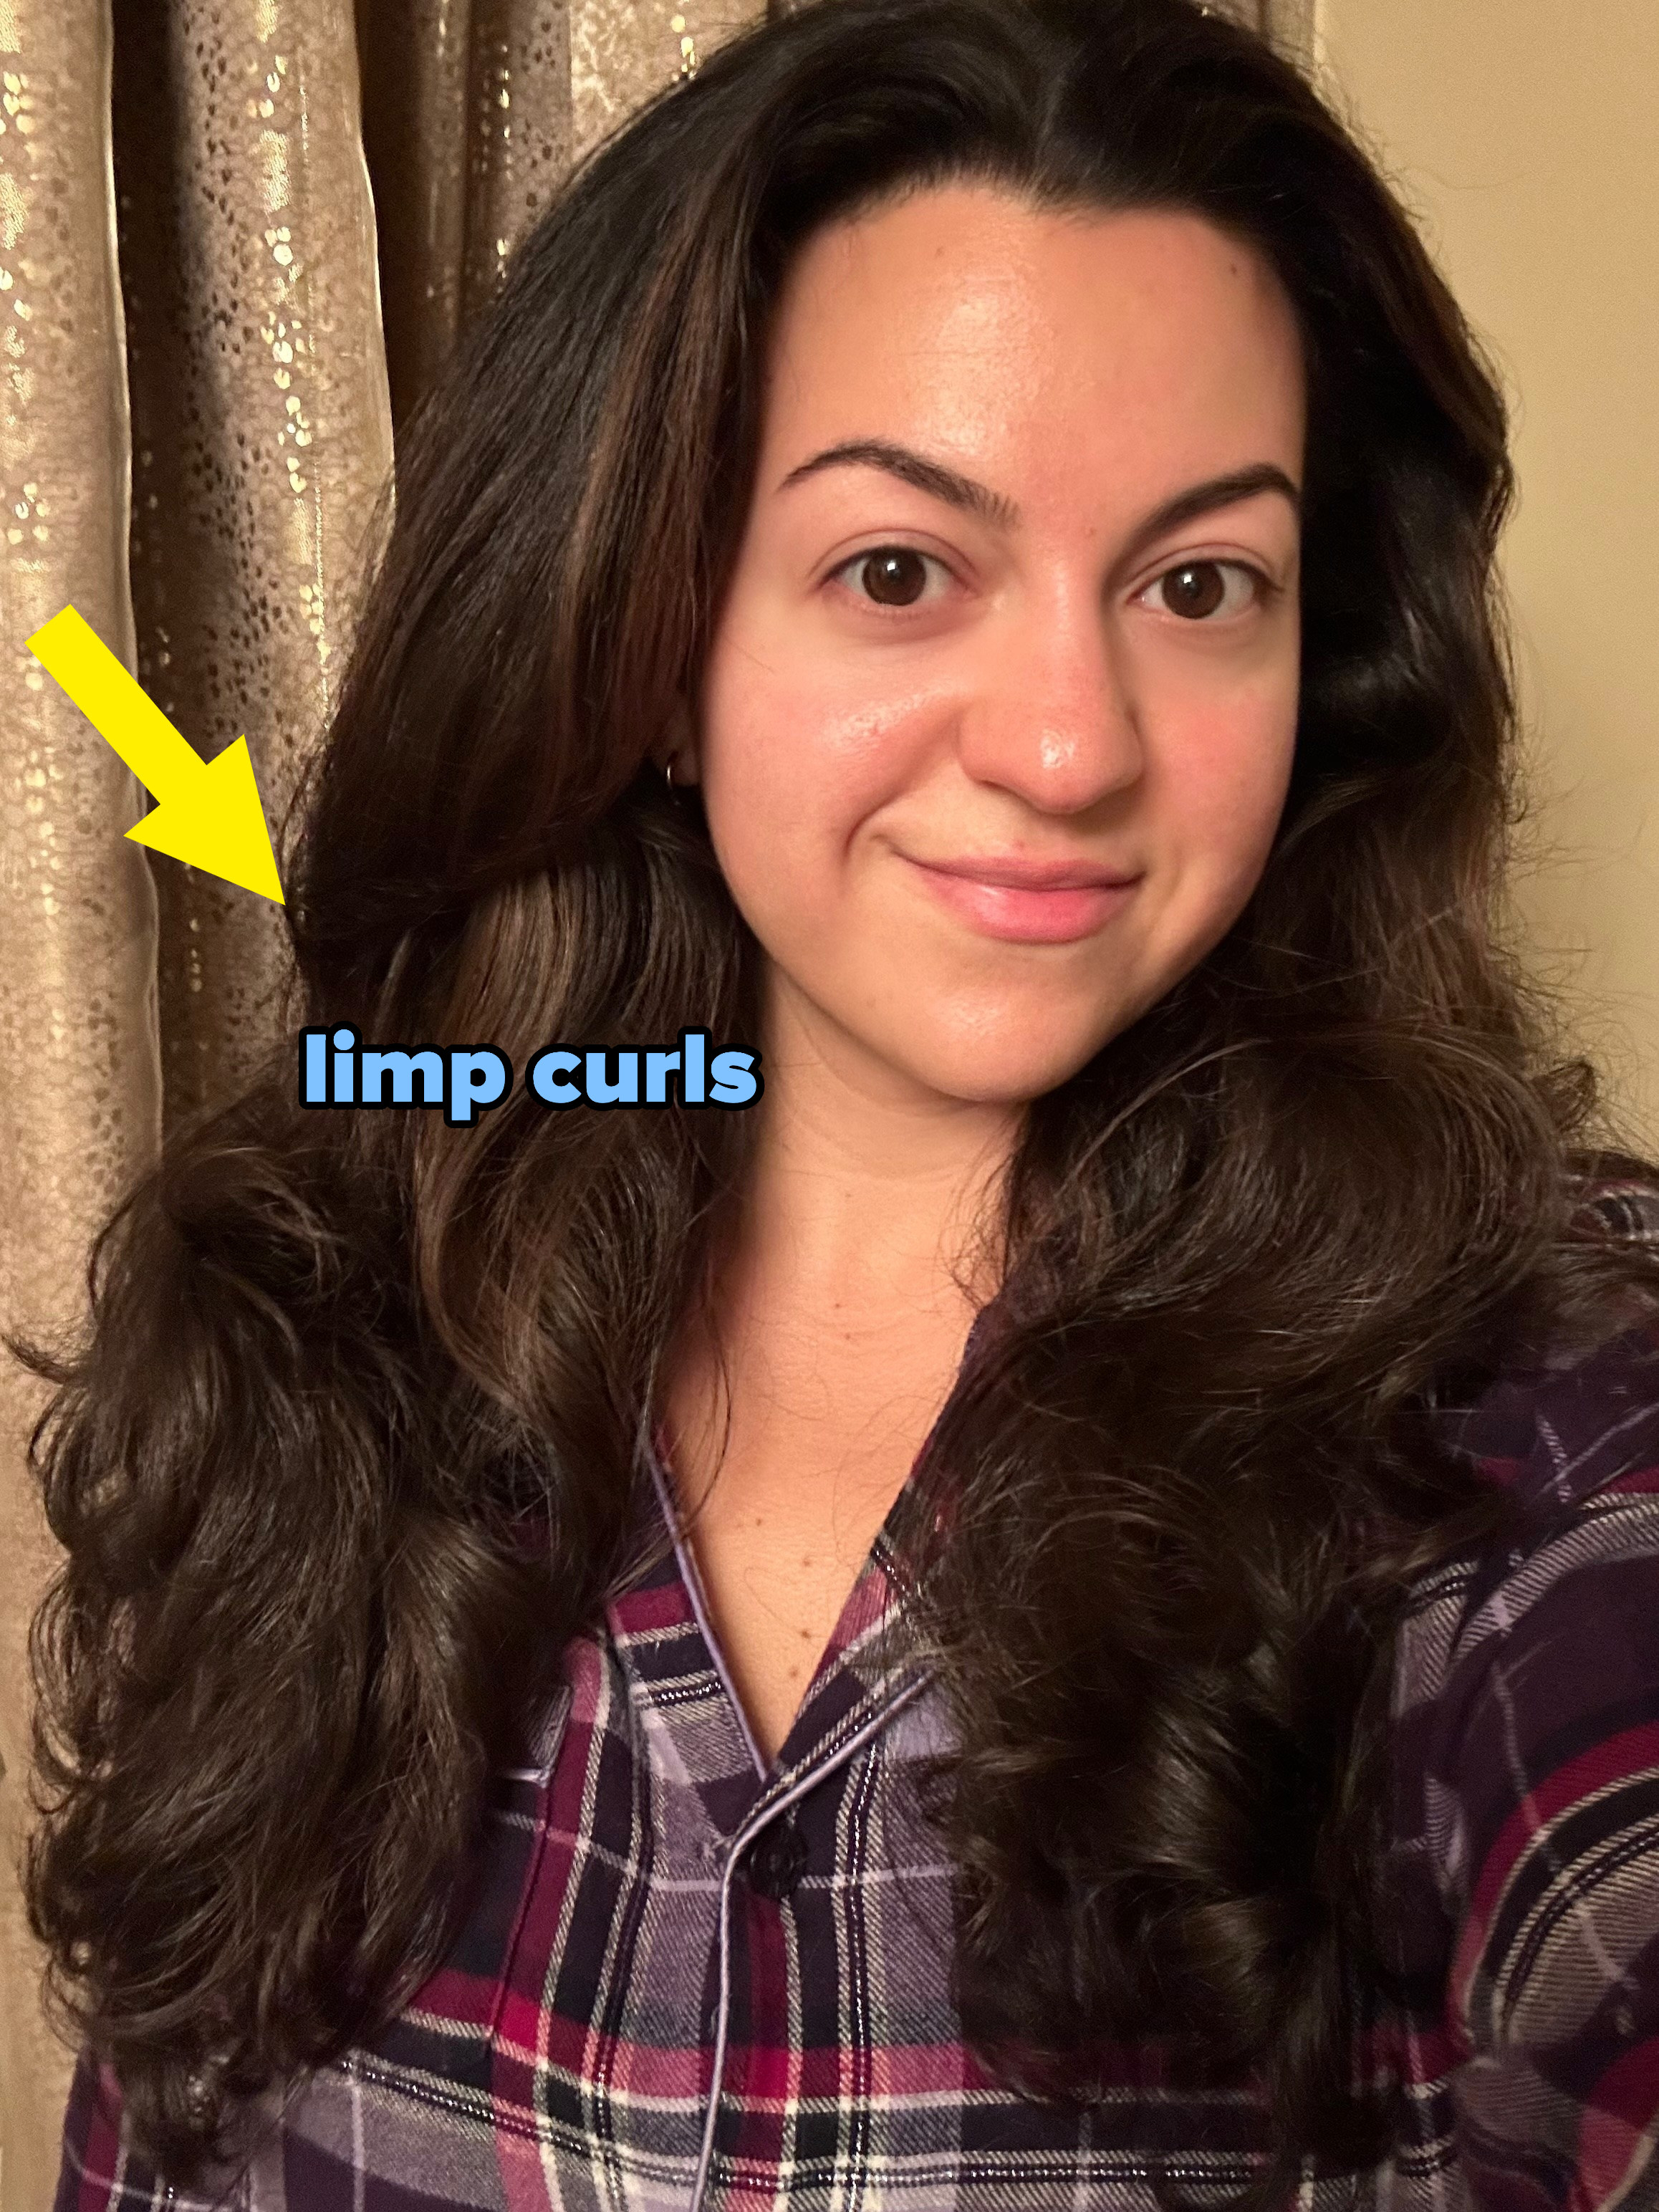 the author showing her limp curls the next morning